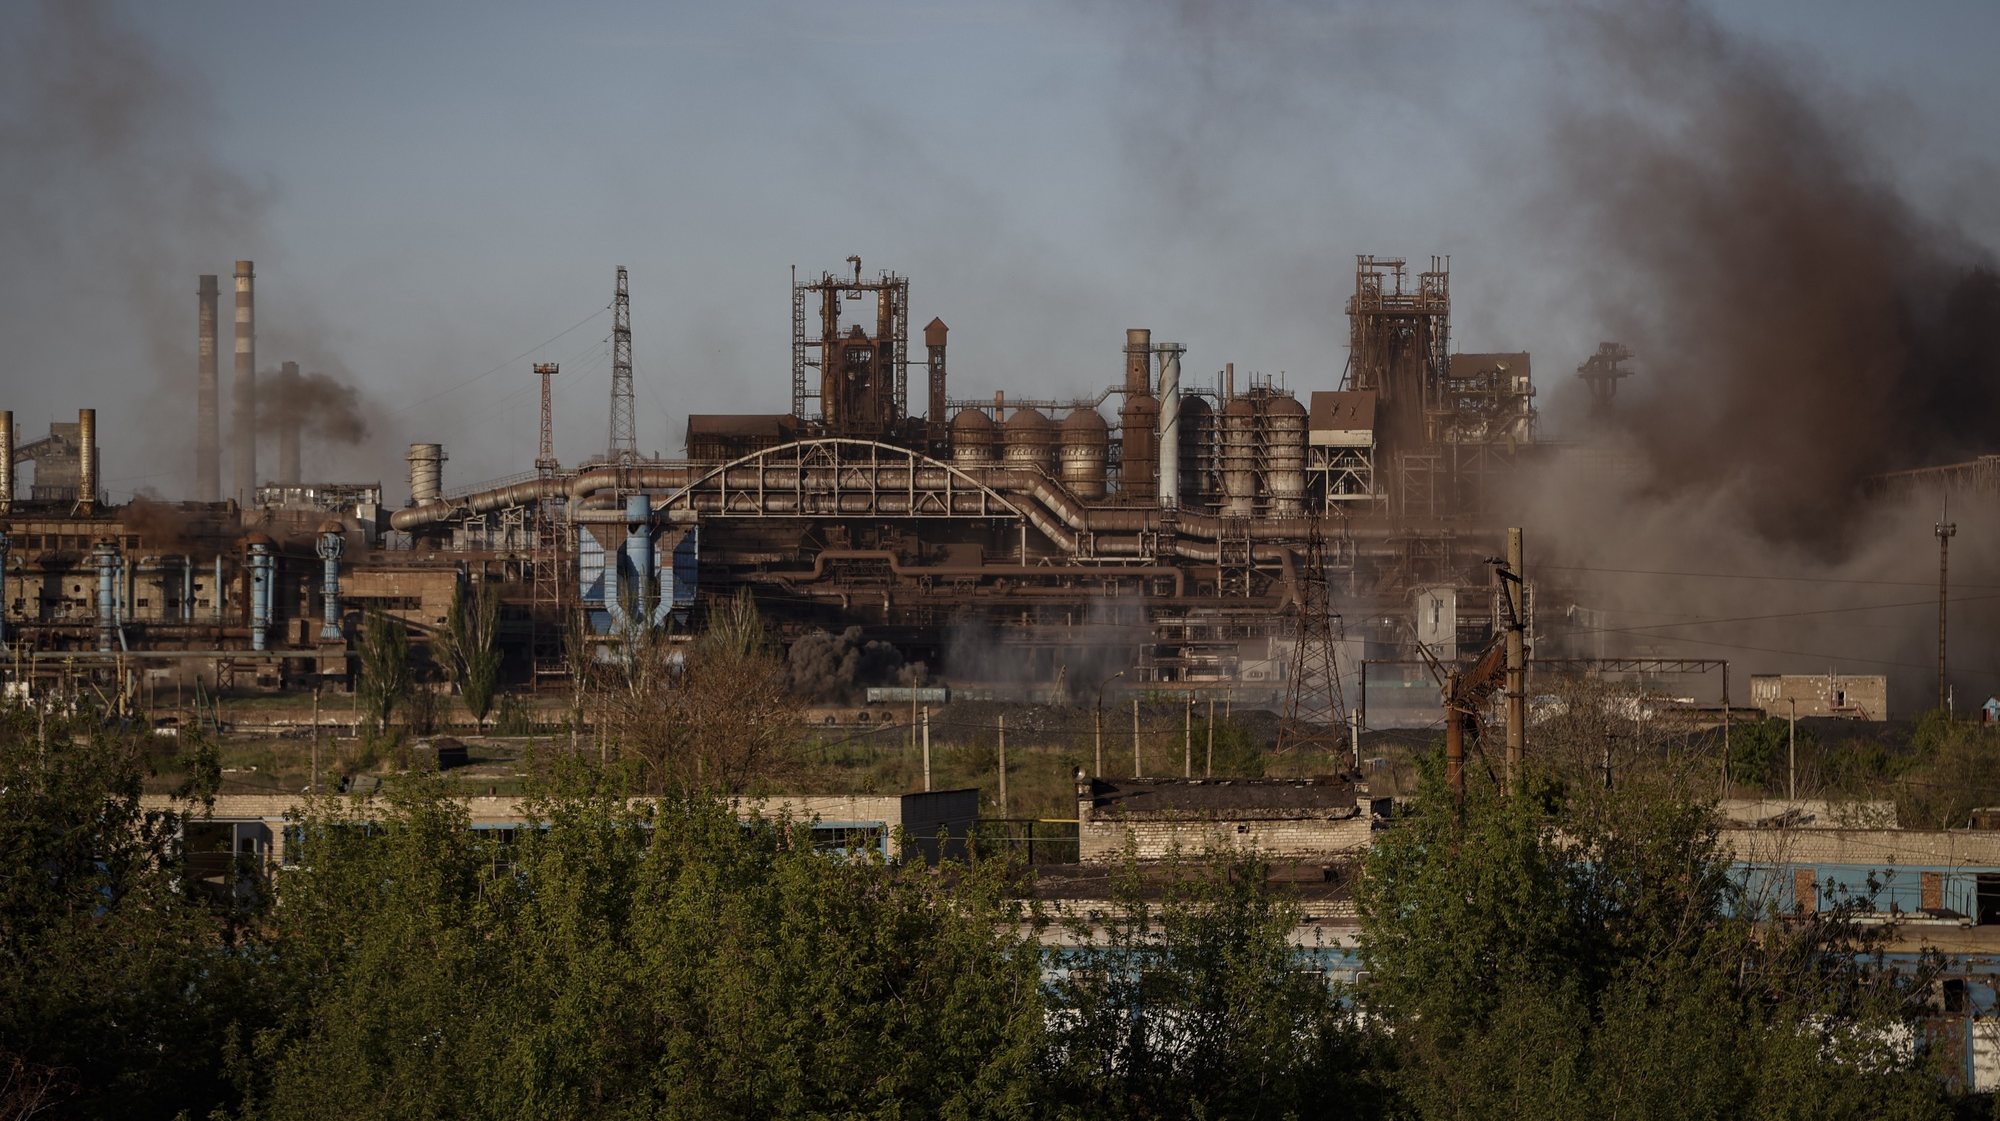 epa09932619 Smoke rises over Azovstal steel plant in Mariupol, Ukraine, 07 May 2022. According to the Interdepartmental Coordinating Headquarters of the Russian Federation for Humanitarian Response, 51 civilians, including 11 children, were evacuated from the Azovstal plant between 05 and 07 May. On 24 February, Russian troops had entered Ukrainian territory in what the Russian president declared a &#039;special military operation&#039;, resulting in fighting and destruction in the country. According to data released by the United Nations High Commission for the Refugees (UNHCR) on 05 May, over 5.7 million refugees have fled Ukraine seeking safety, protection and assistance in neighboring countries.  EPA/ALESSANDRO GUERRA